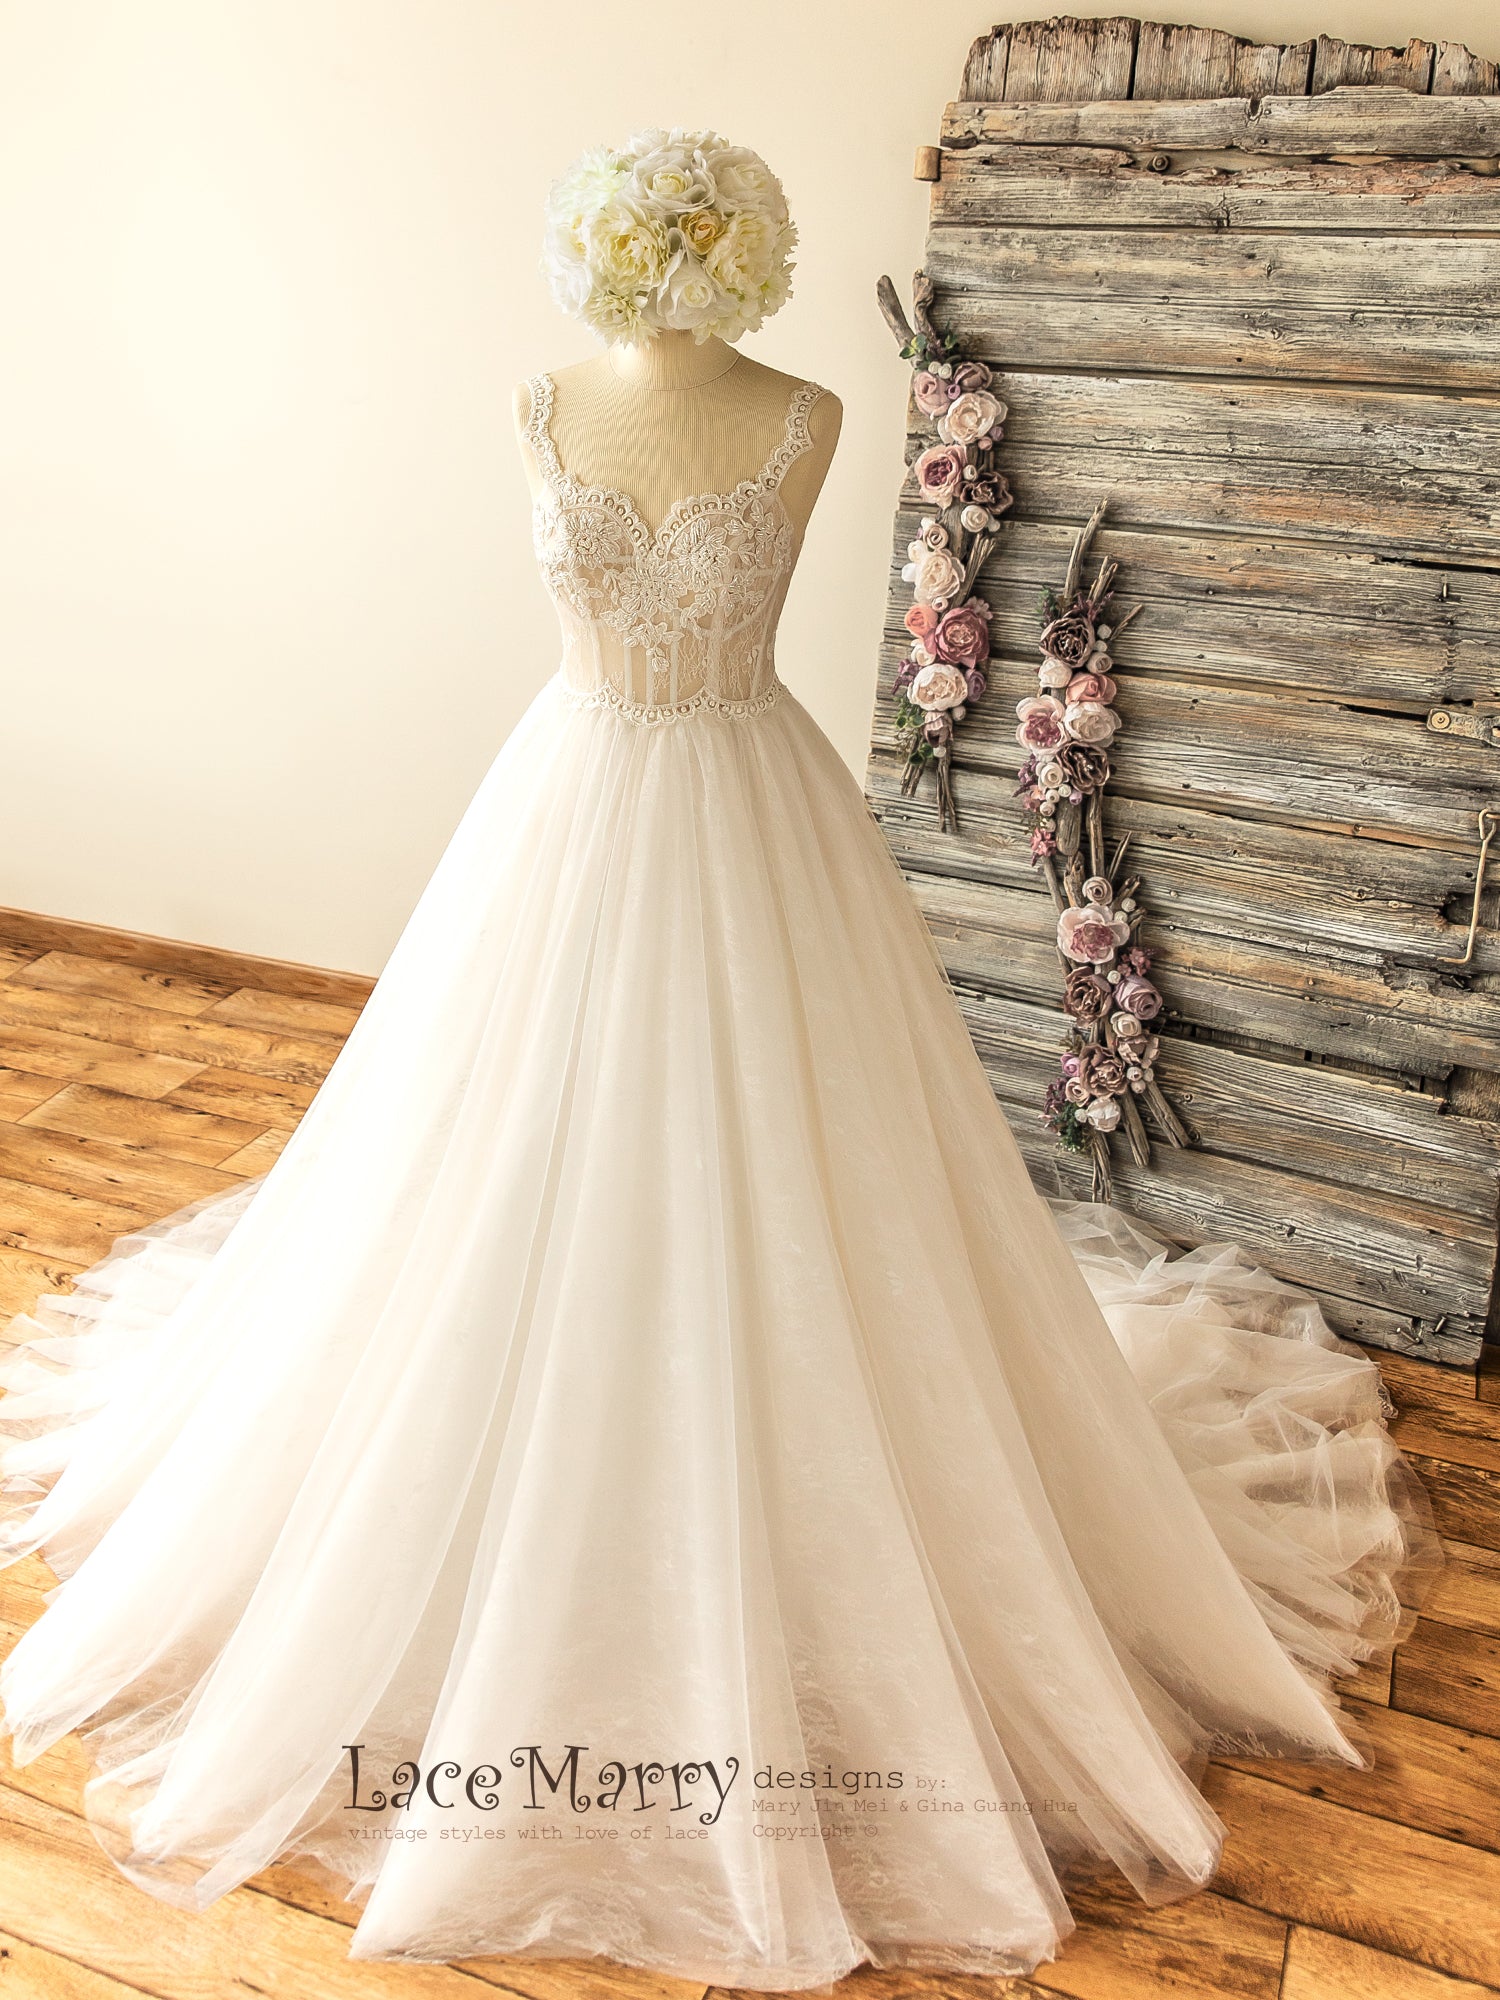 White Ball Gown Tulle Sweetheart Sparkly Corset Wedding Dress With Crystal